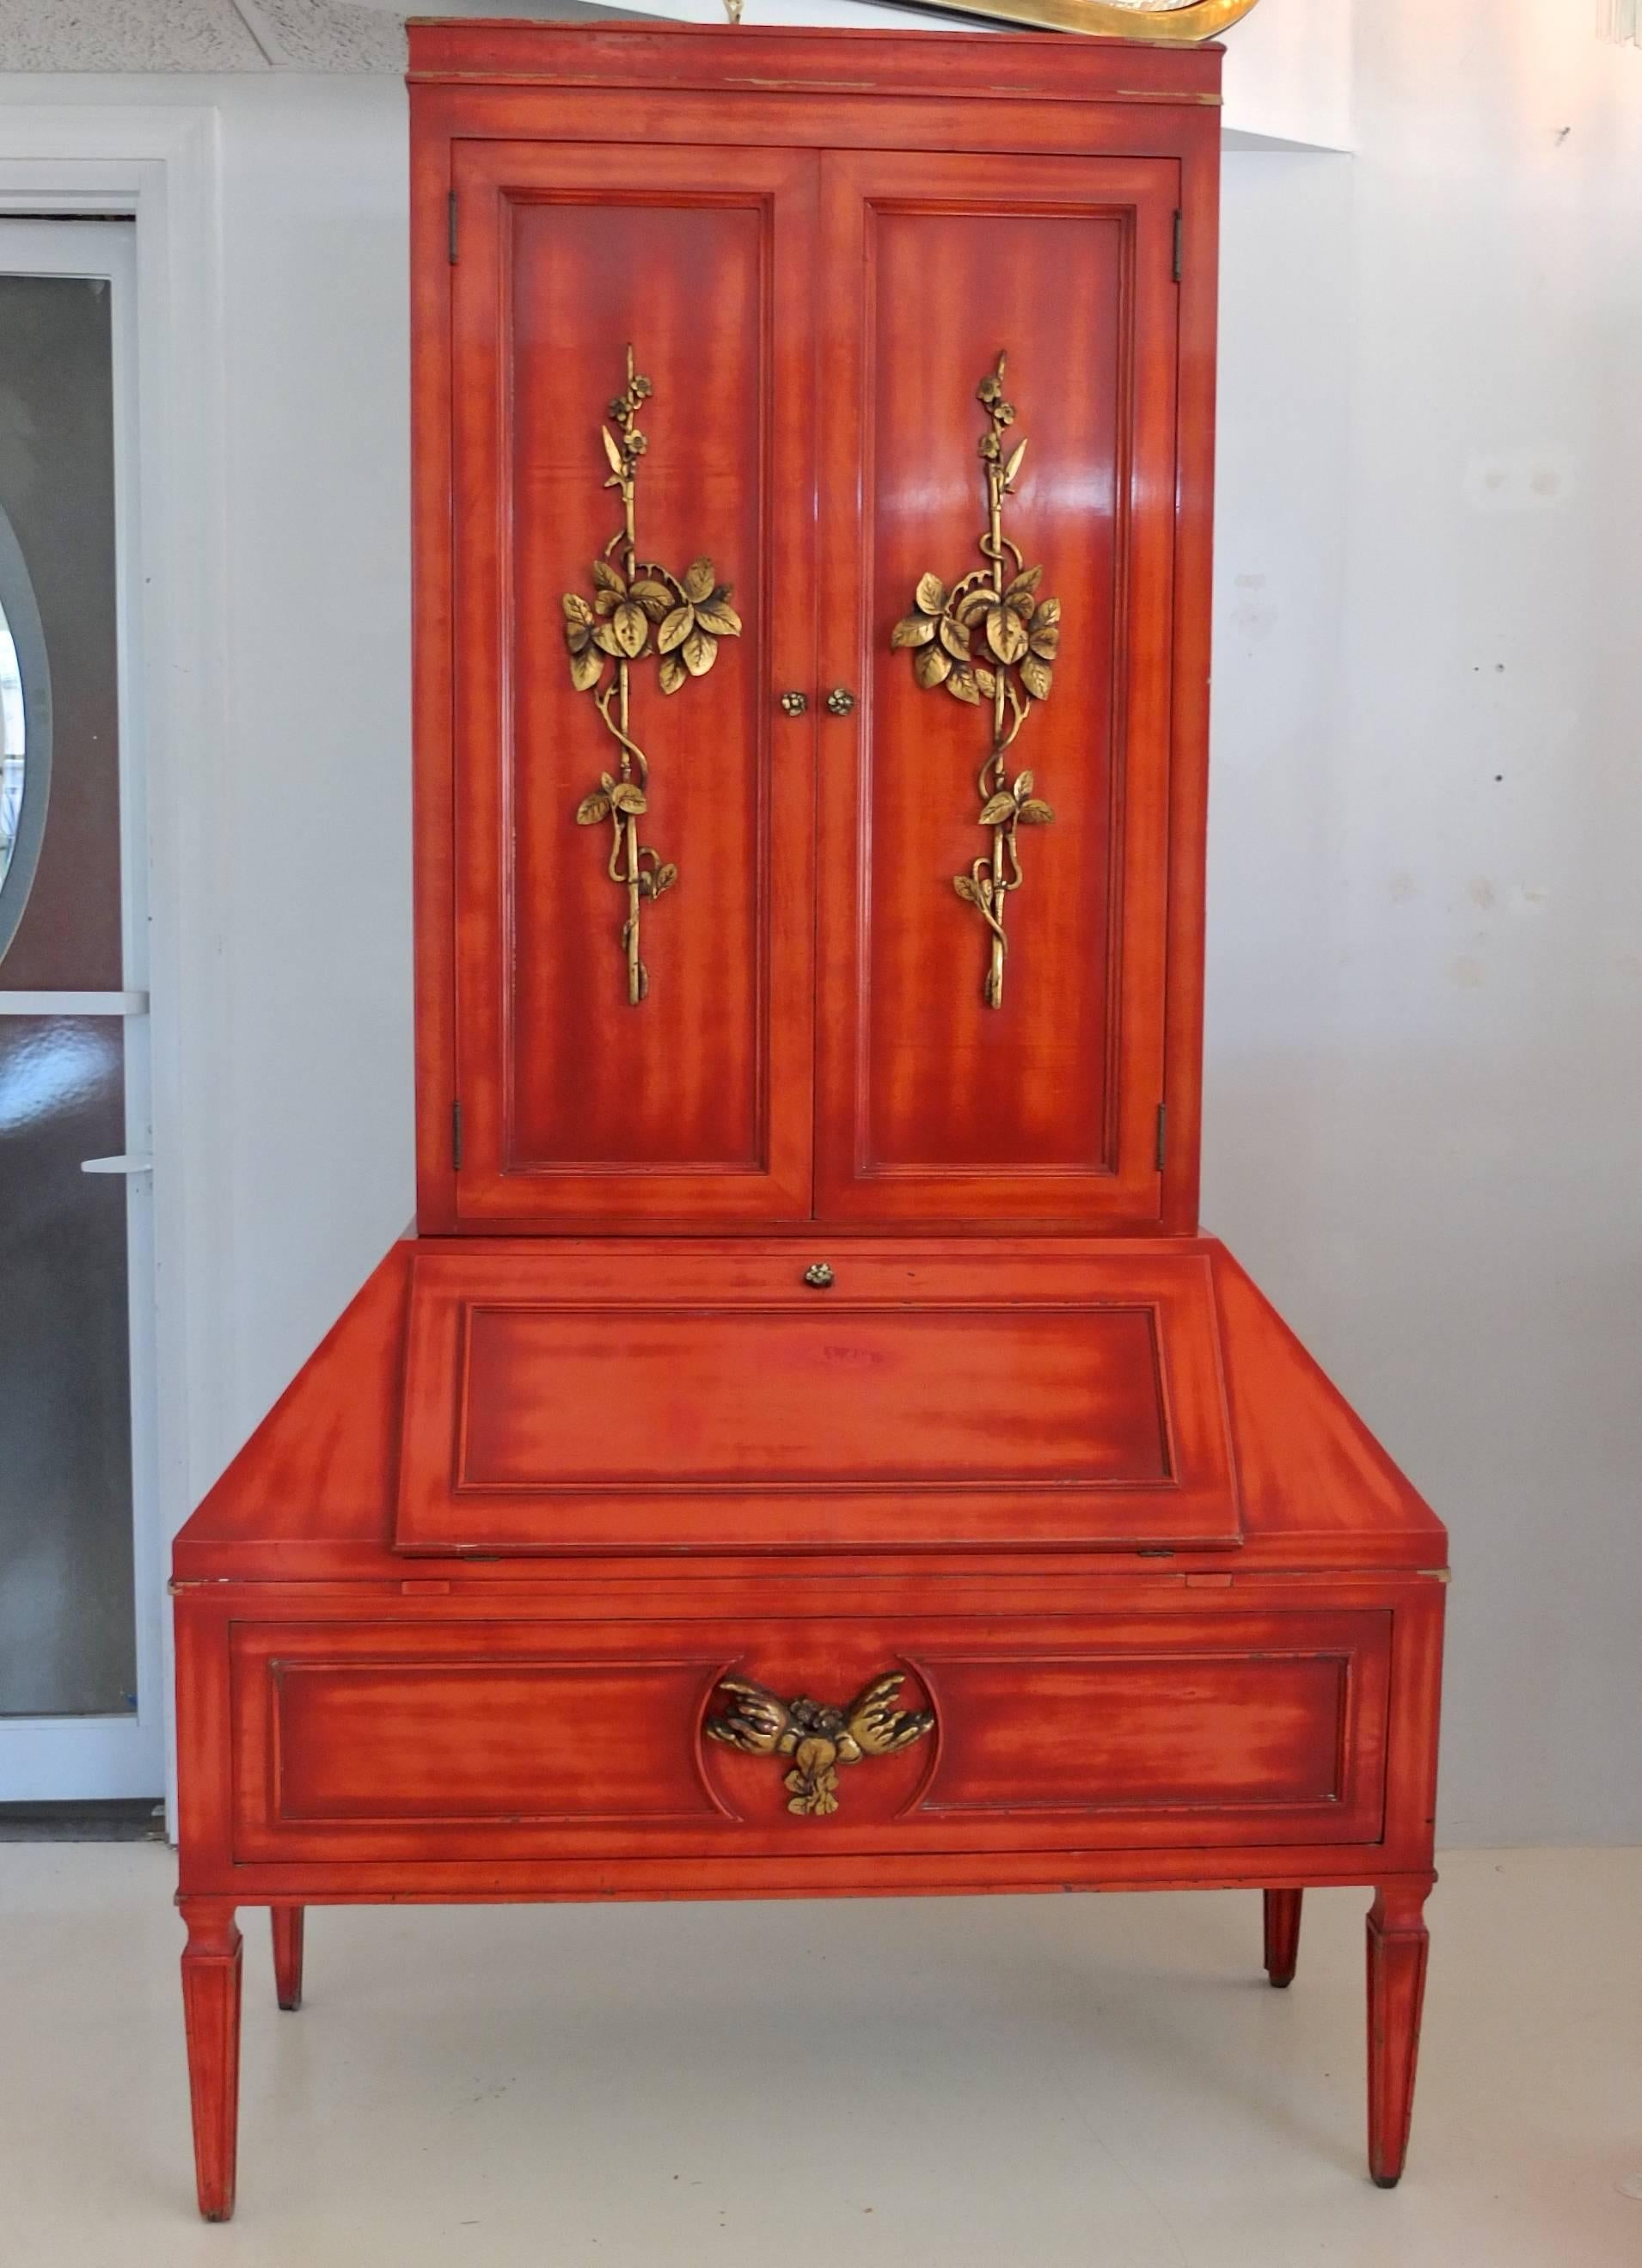 Extremely rare, possibly one of a kind, secretary cabinet with bookcase by the godfather of exotic modernism, James Mont, circa 1950. Hand rubbed cinnabar lacquered finish with applied hand-carved giltwood embellishments. Mont's lacquer finishes are